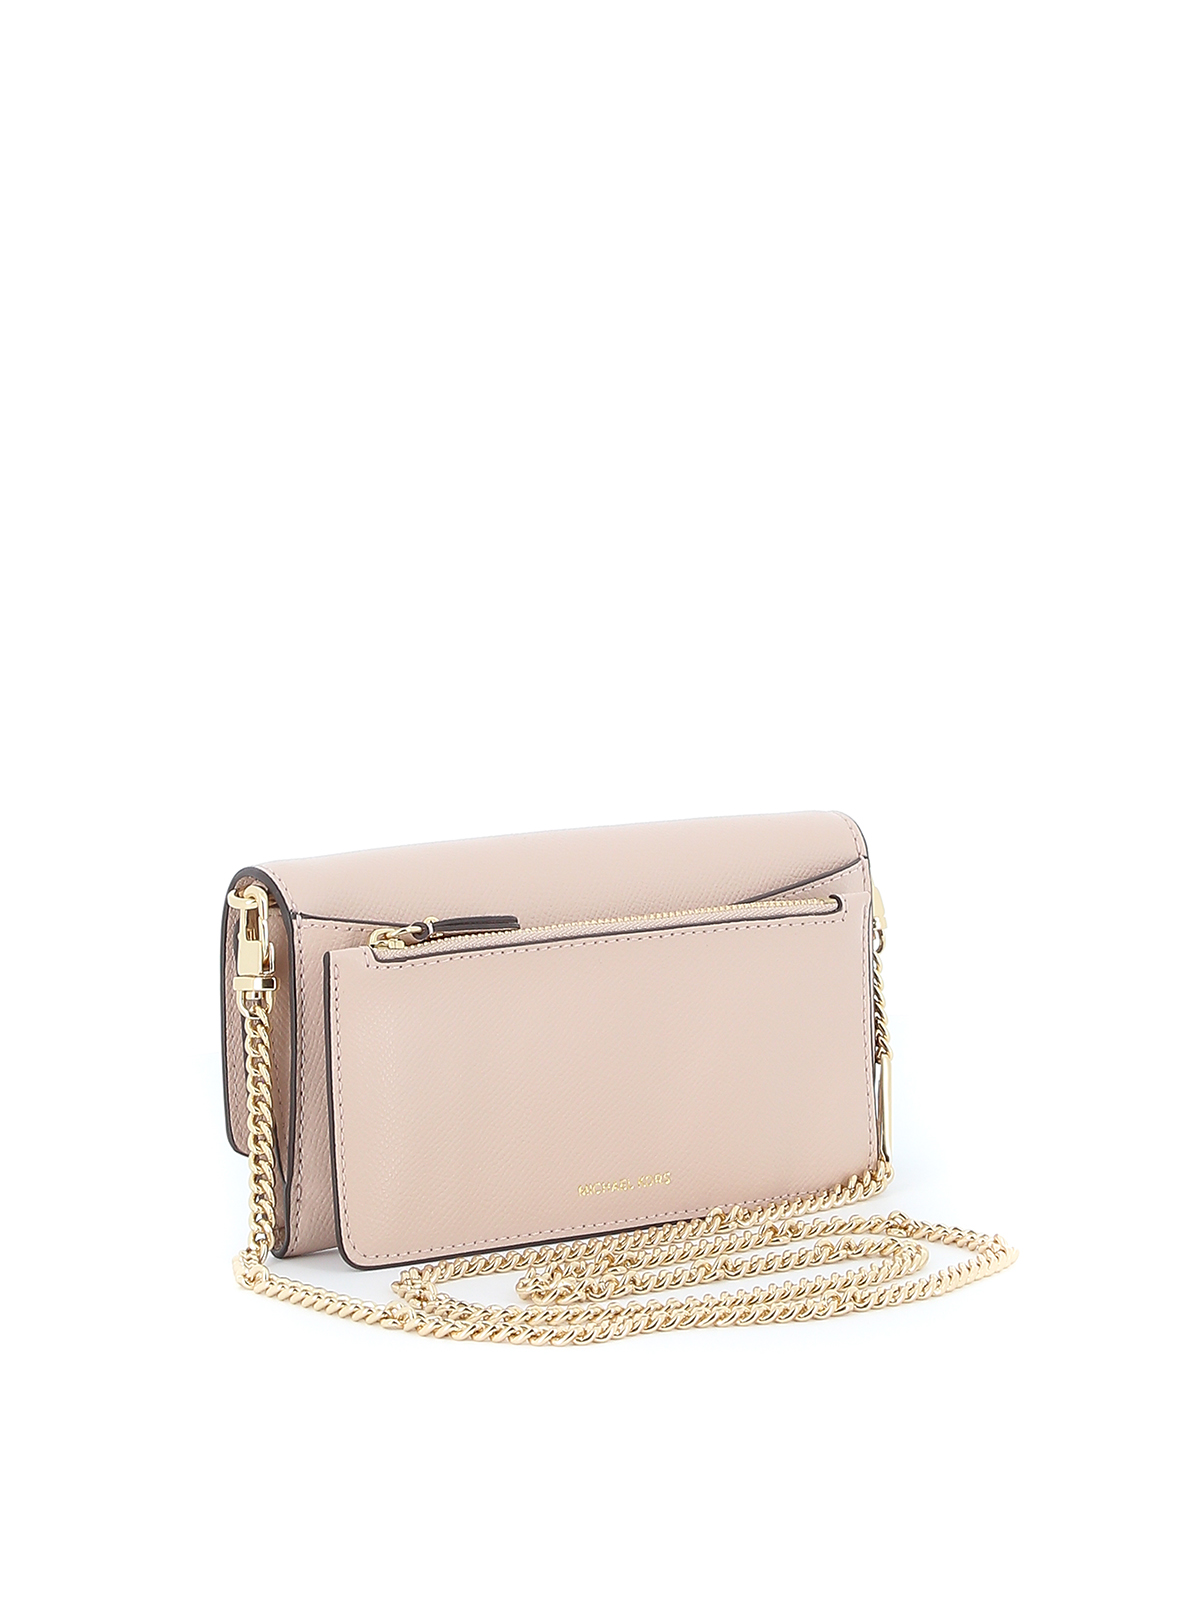 Michael Kors Jet Set Charm Large Wallet On A Chain in Soft Pink   Exclusively USA